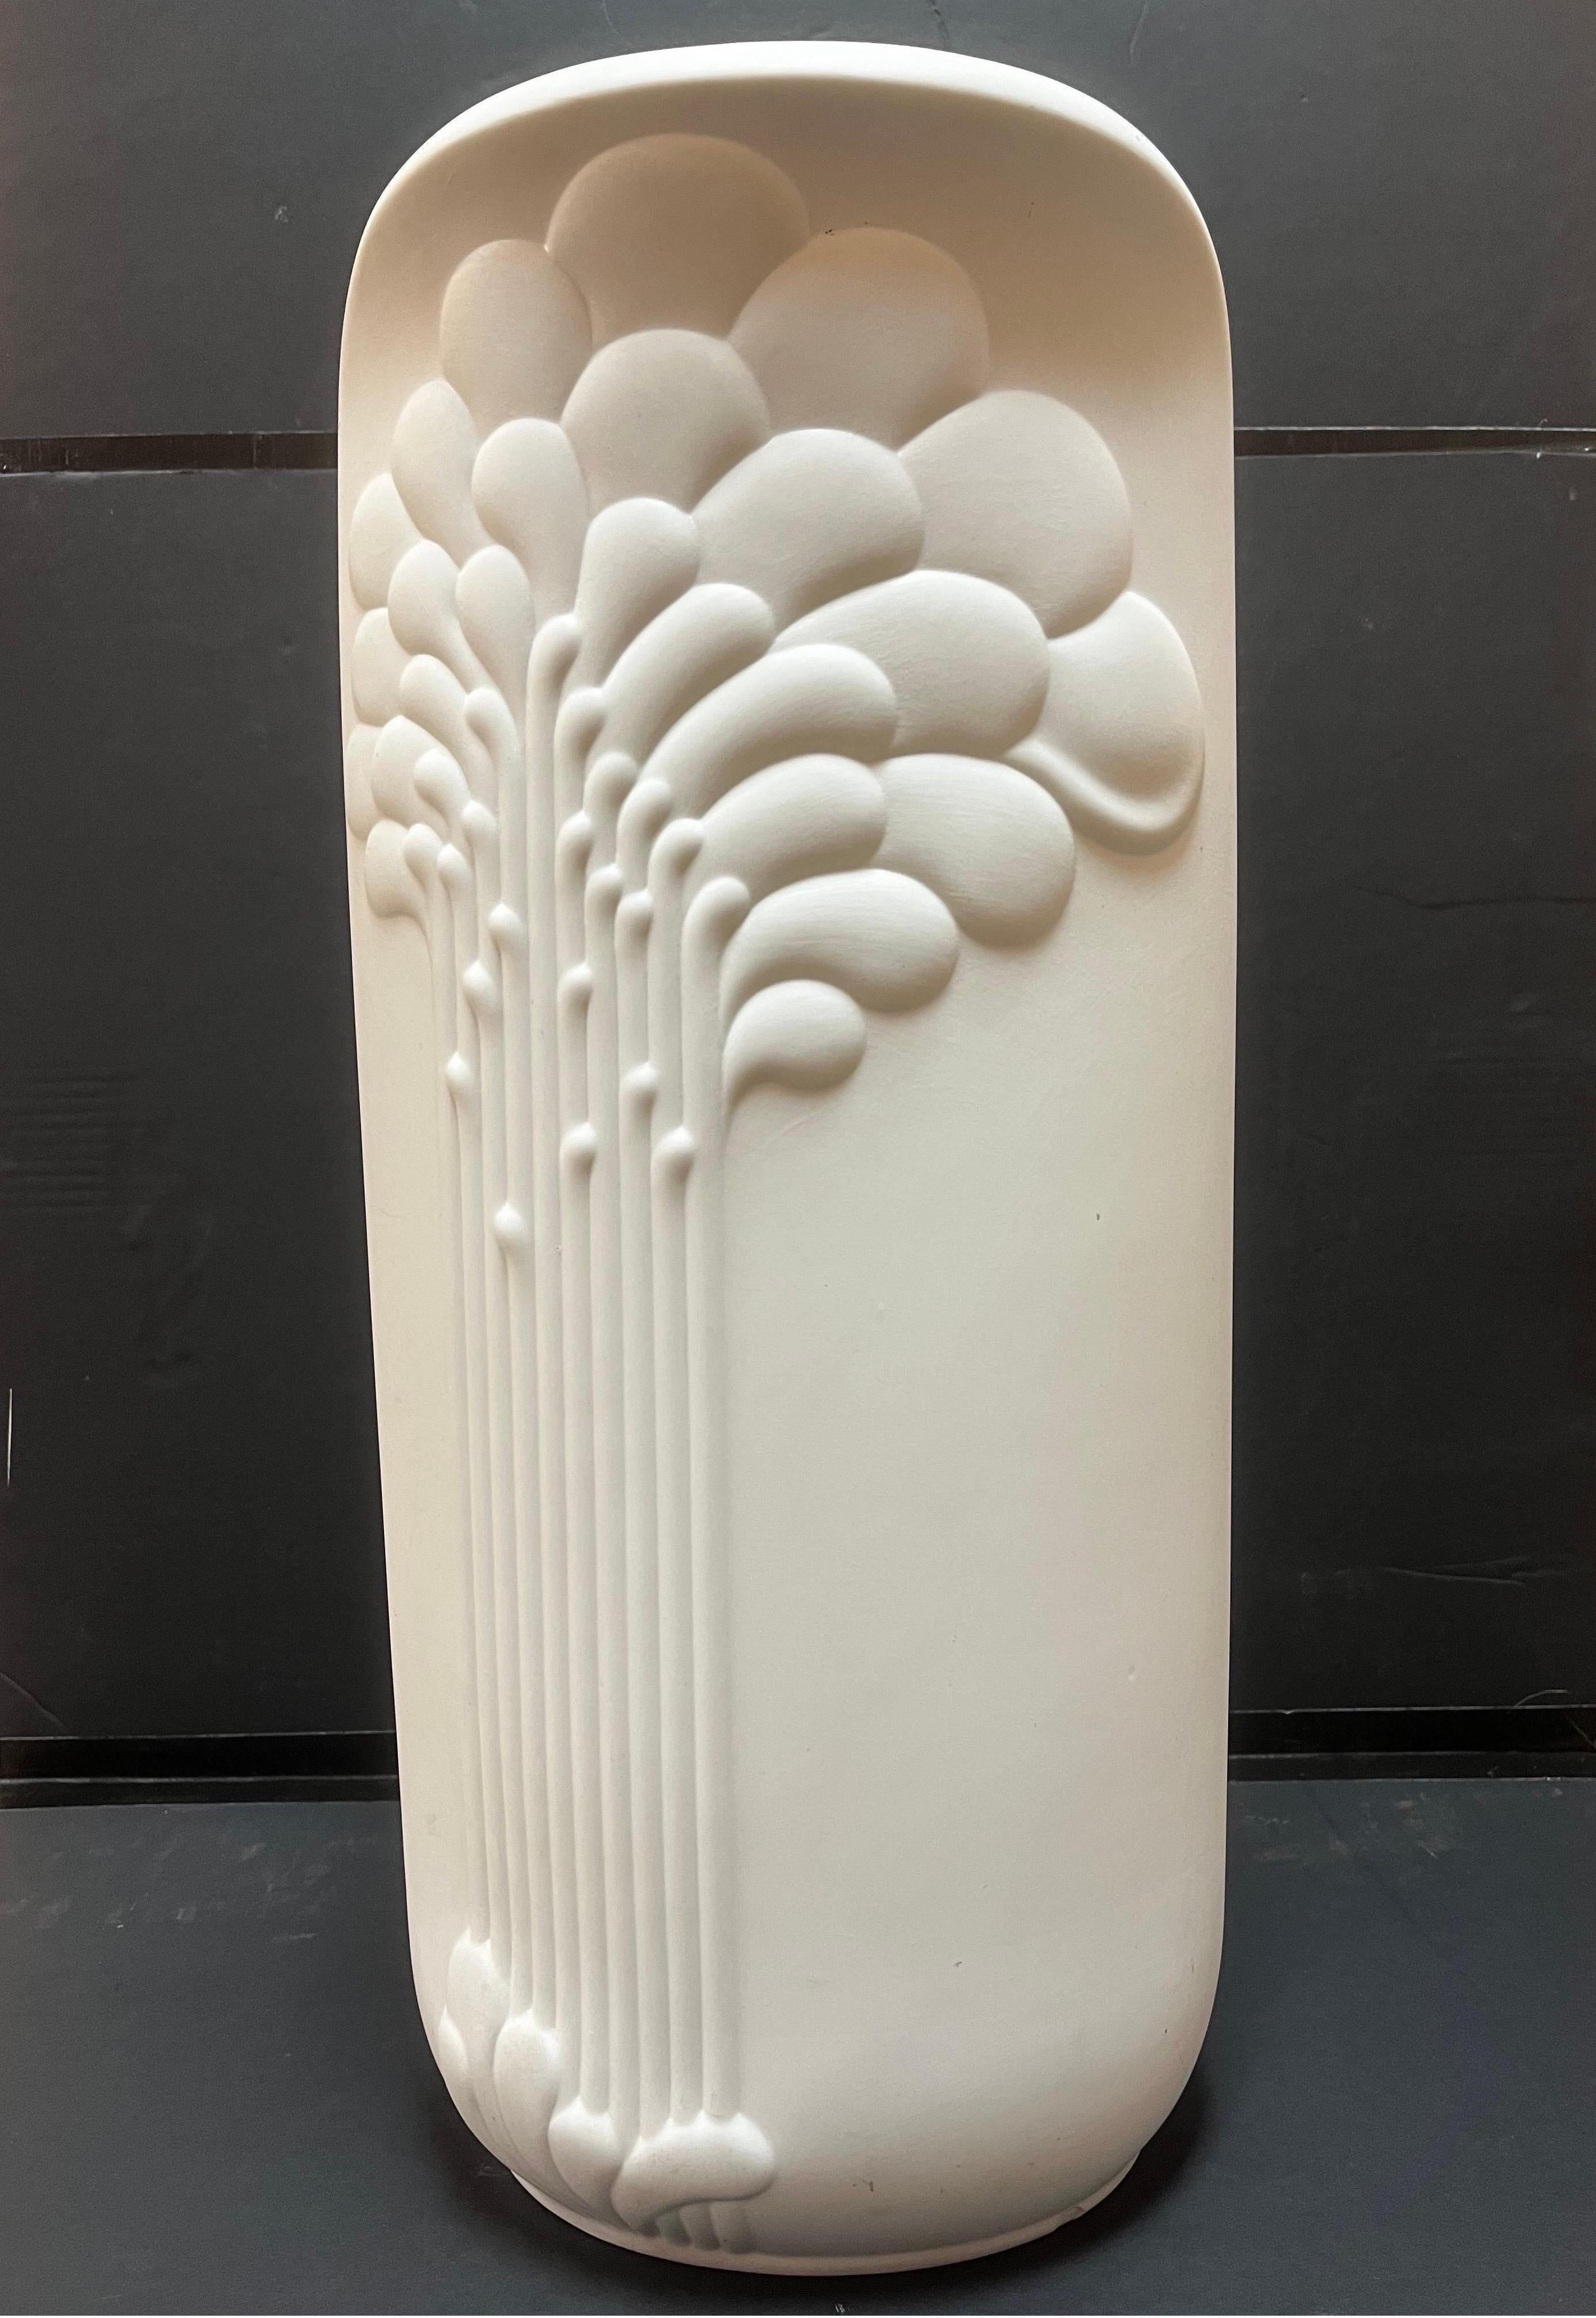 A vintage circa 1970's monumental floor vase or umbrella stand by Manfred Frey for Kaiser West Germany. This large porcelain vase stands at just under 22 inches in height. The design has an op art feel to it and is complimented by the matte finish.